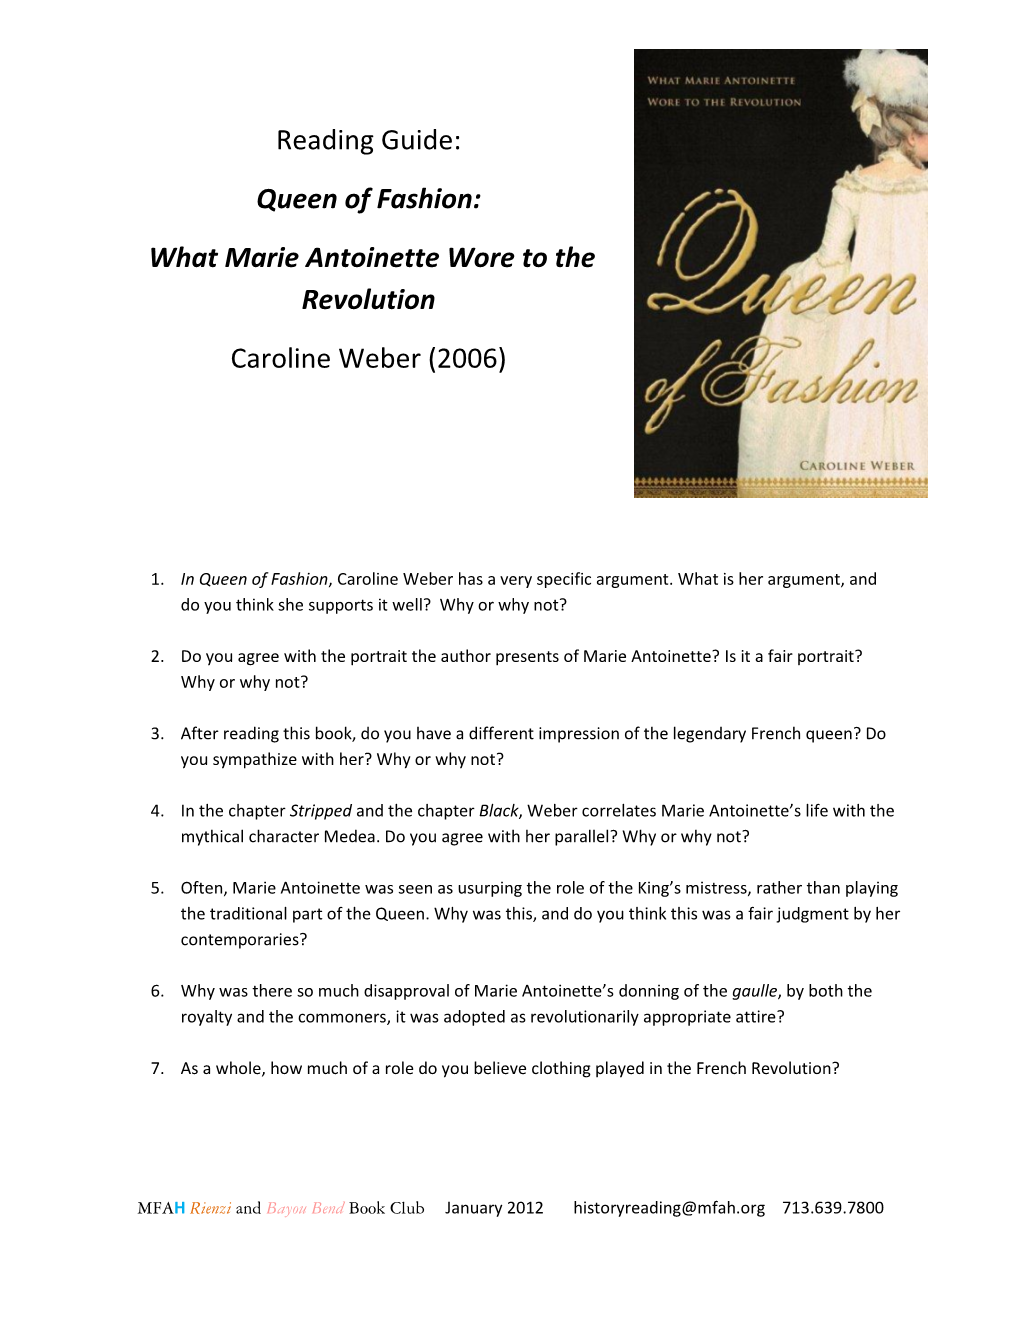 Reading Guide: Queen of Fashion: What Marie Antoinette Wore to the Revolution Caroline Weber (2006)